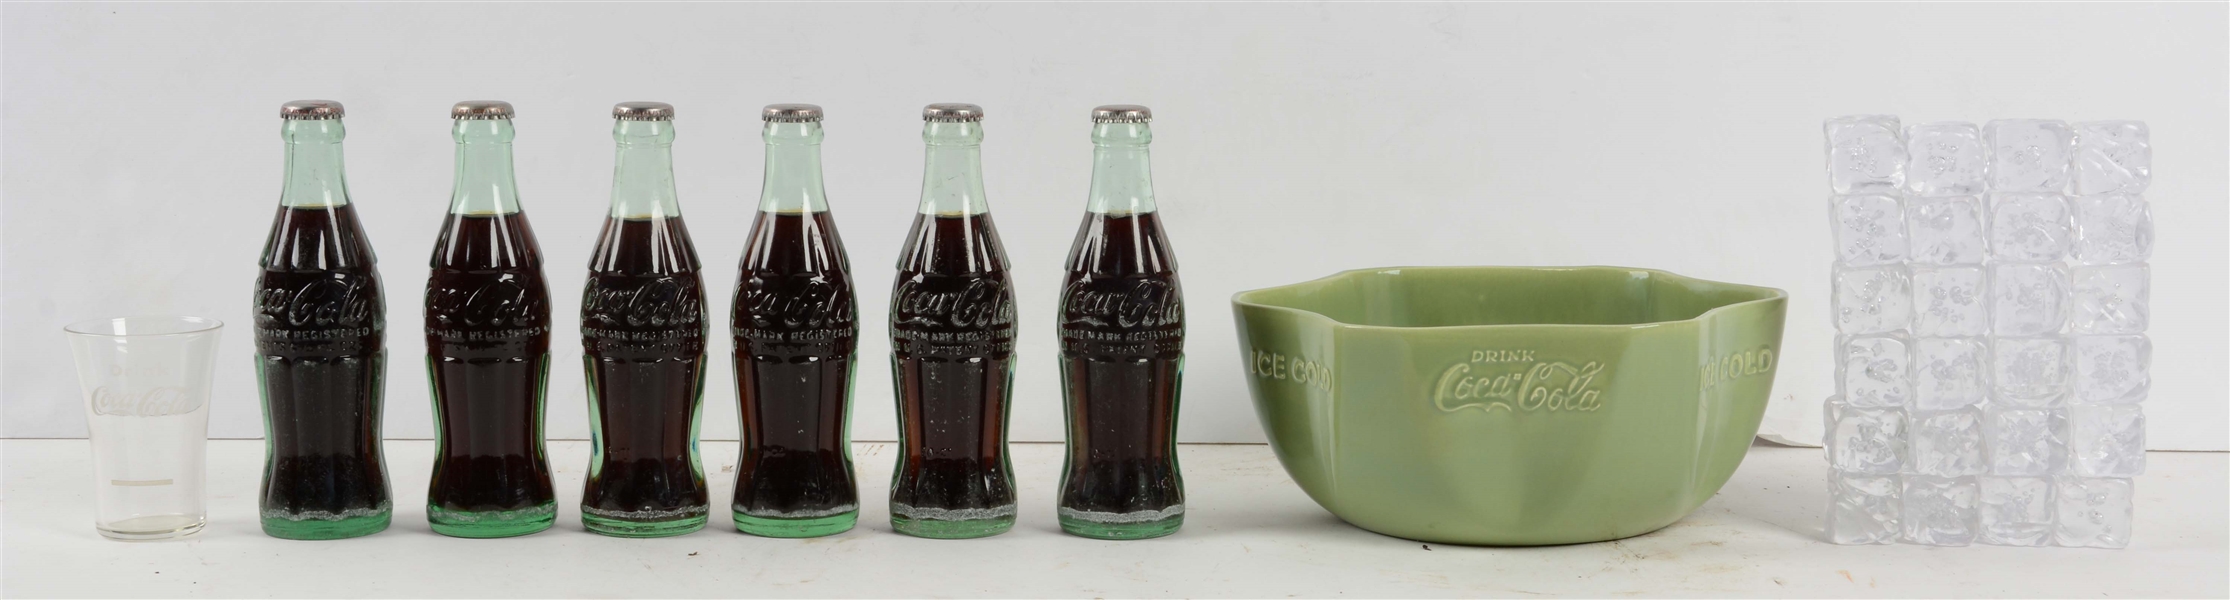 LOT OF 9: COCA-COLA ICE BUCKET DISPLAY WITH BOTTLES.